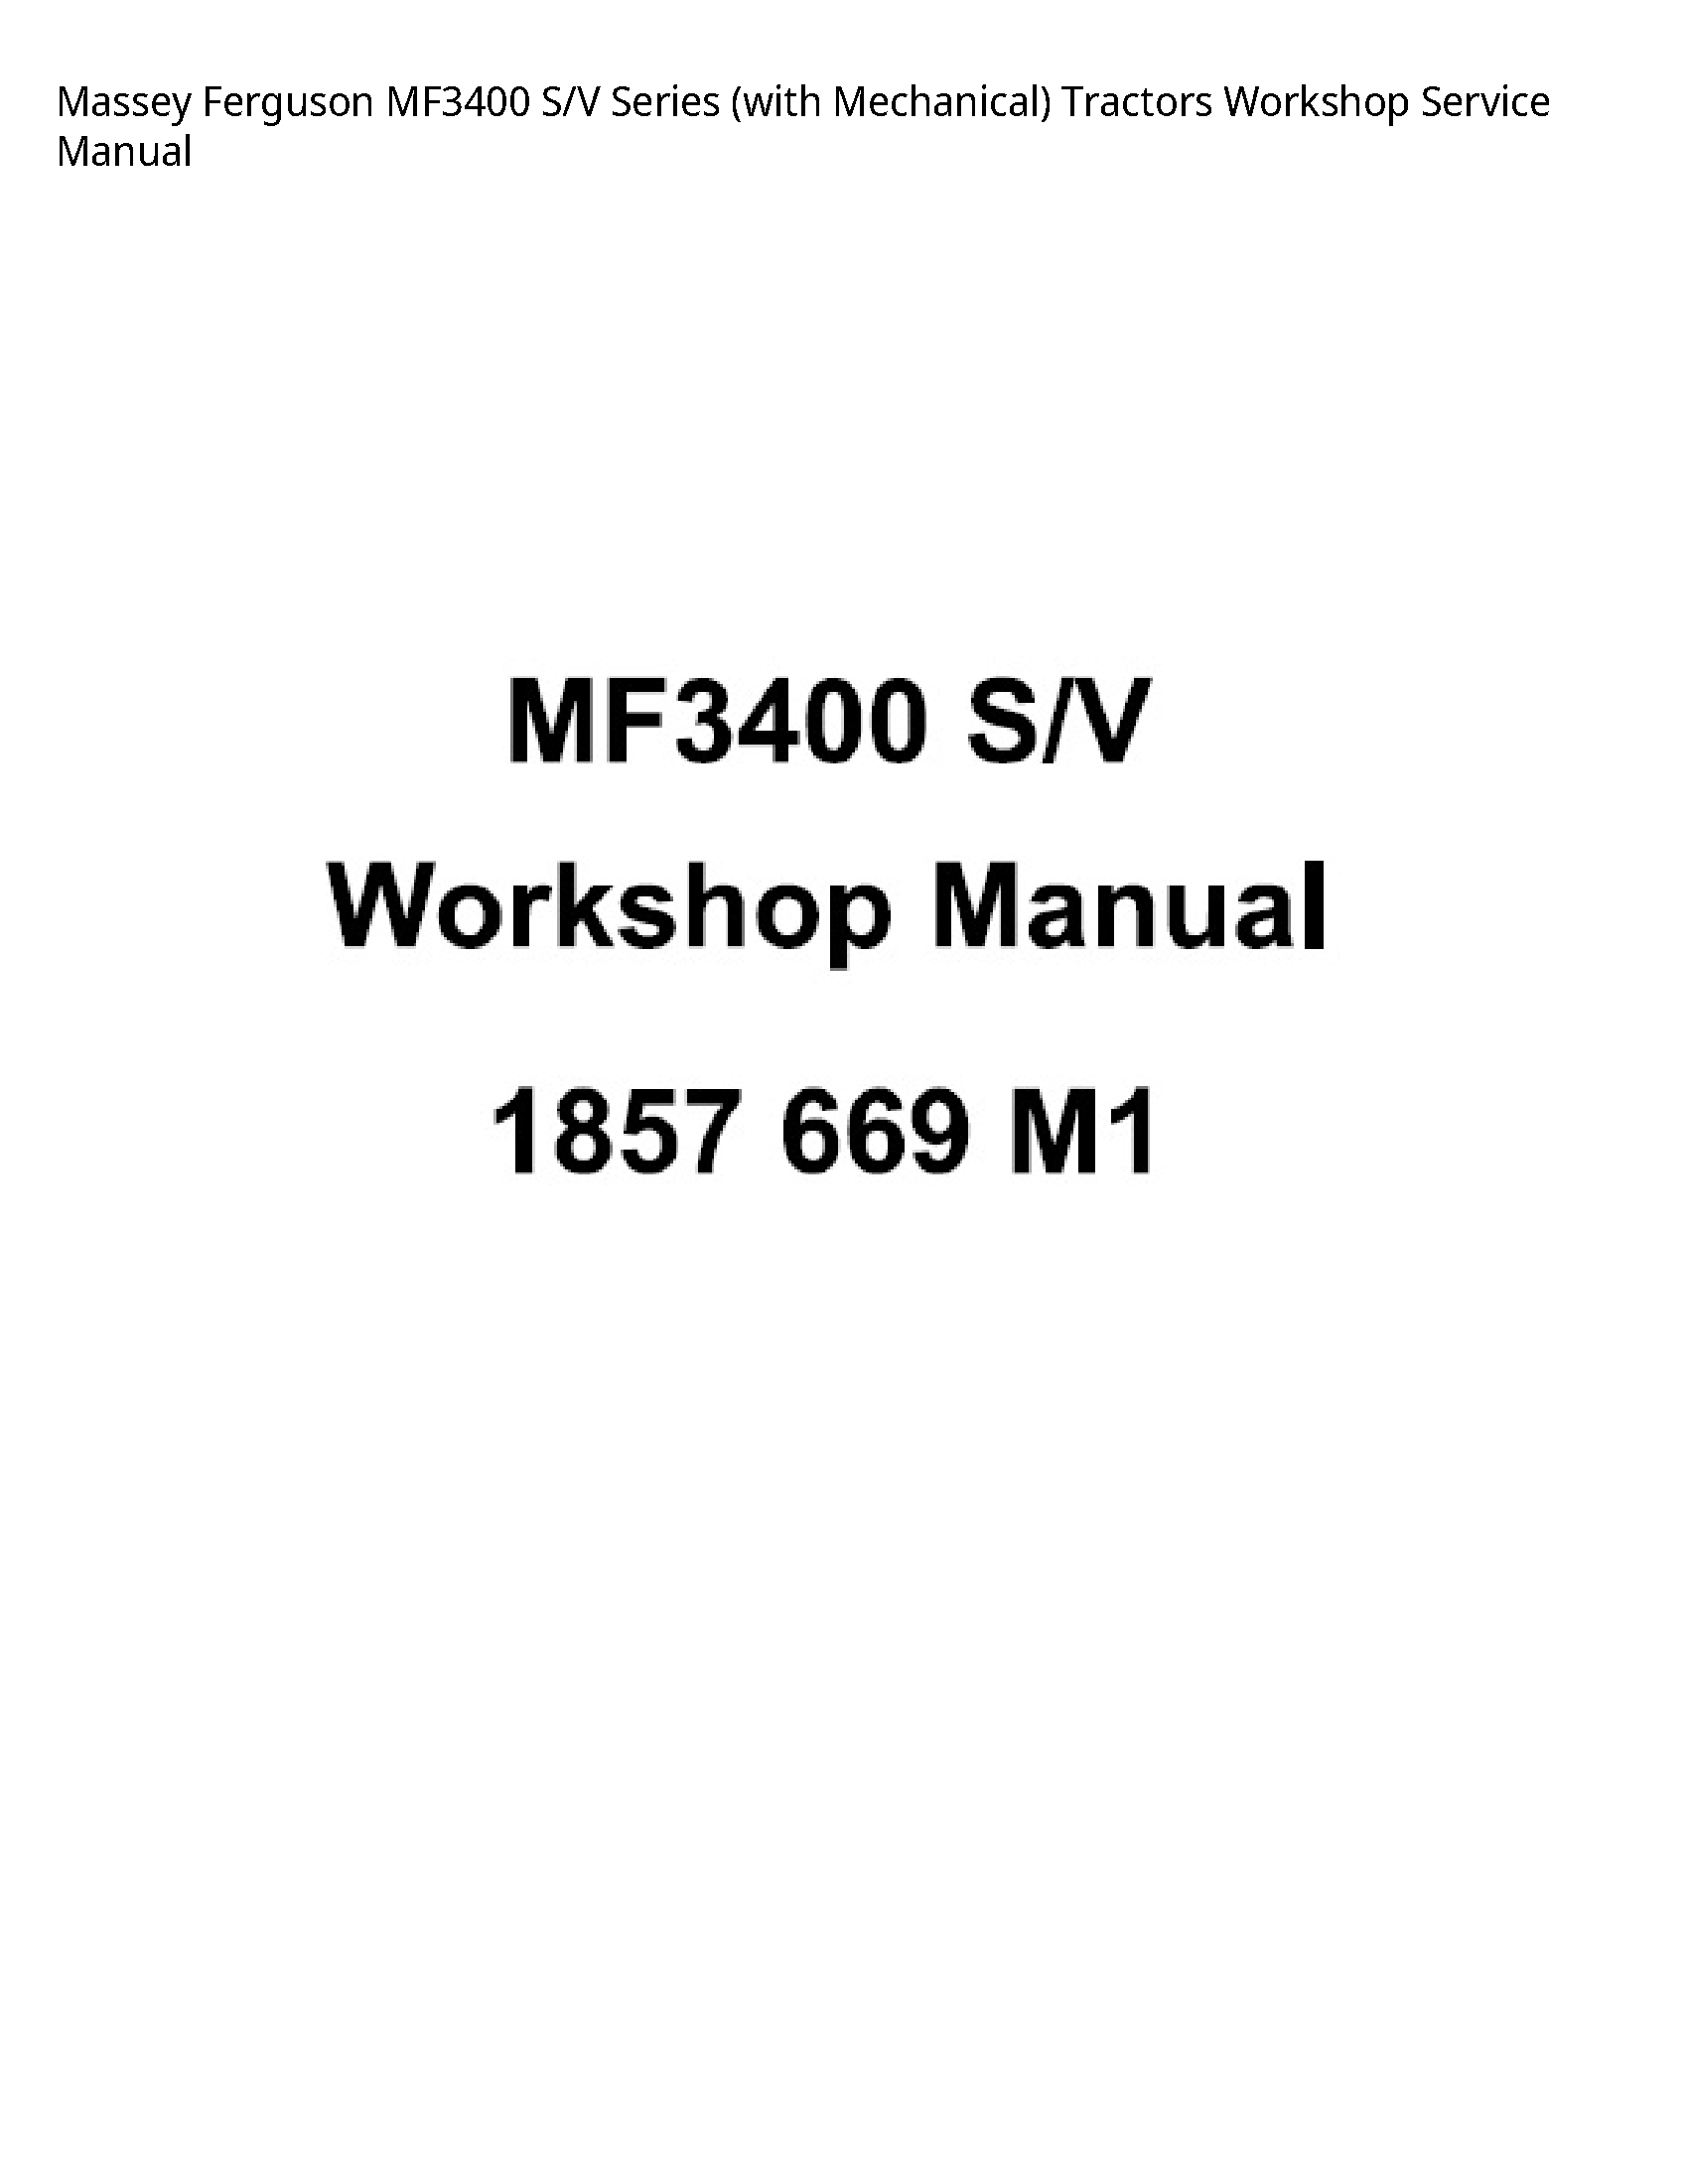 Massey Ferguson MF3400 S/V Series (with Mechanical) Tractors Service manual